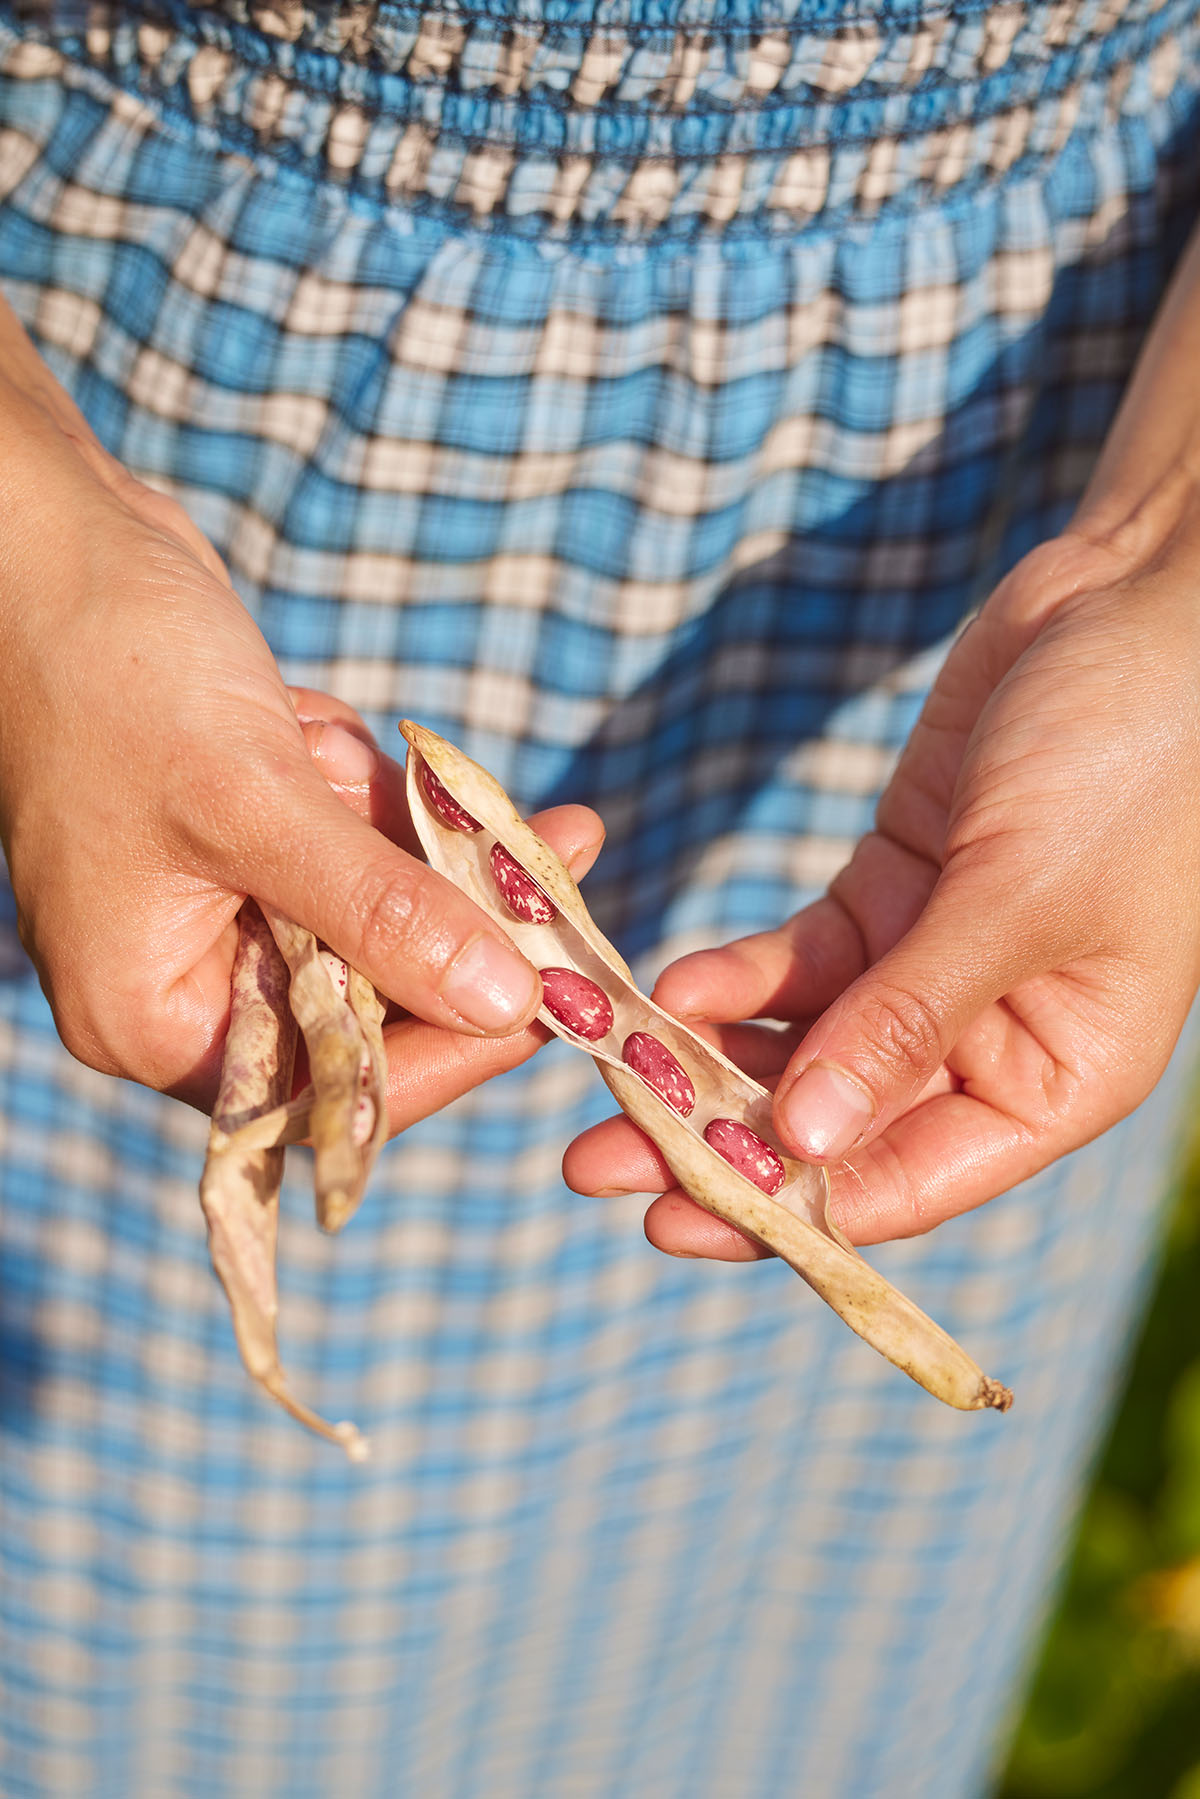 Woman's hands holding a dried bean pod and opening it to show the beans inside.